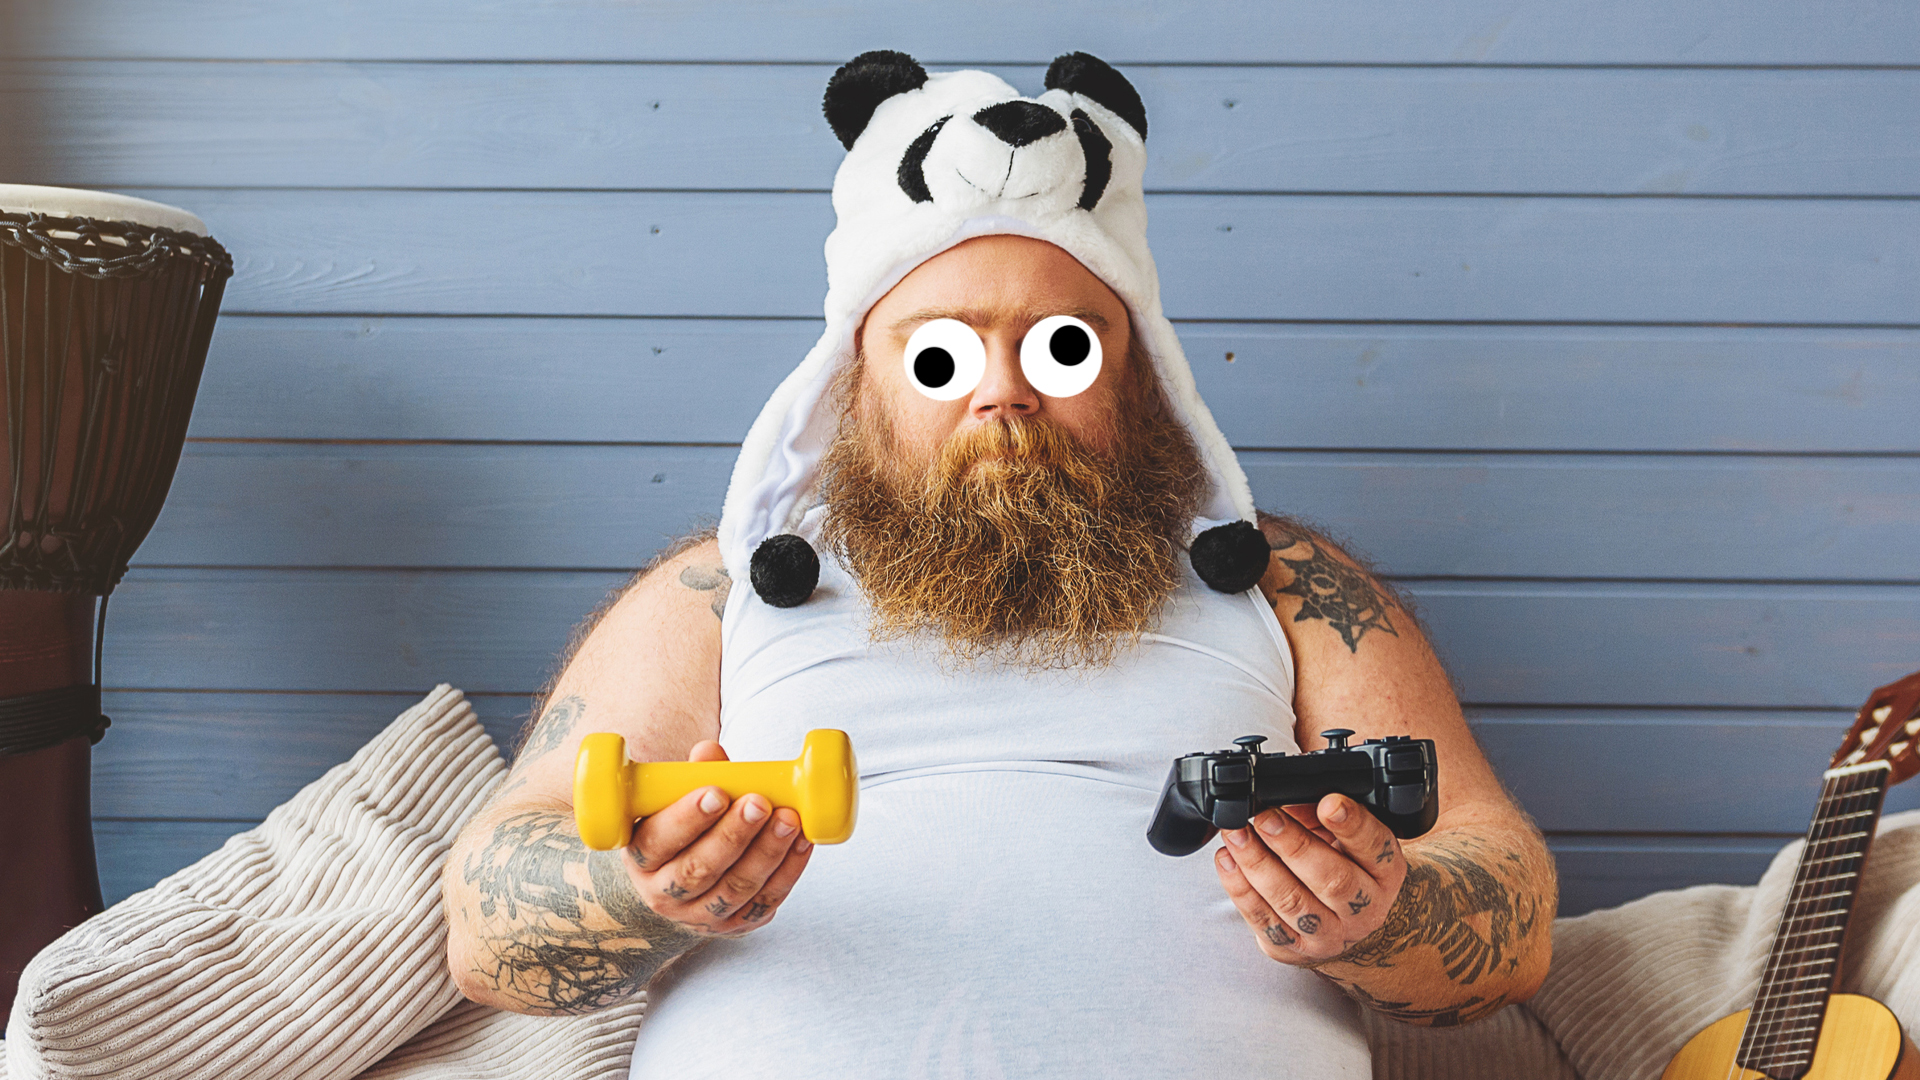 A man wearing a Panda hat holding two video game controllers